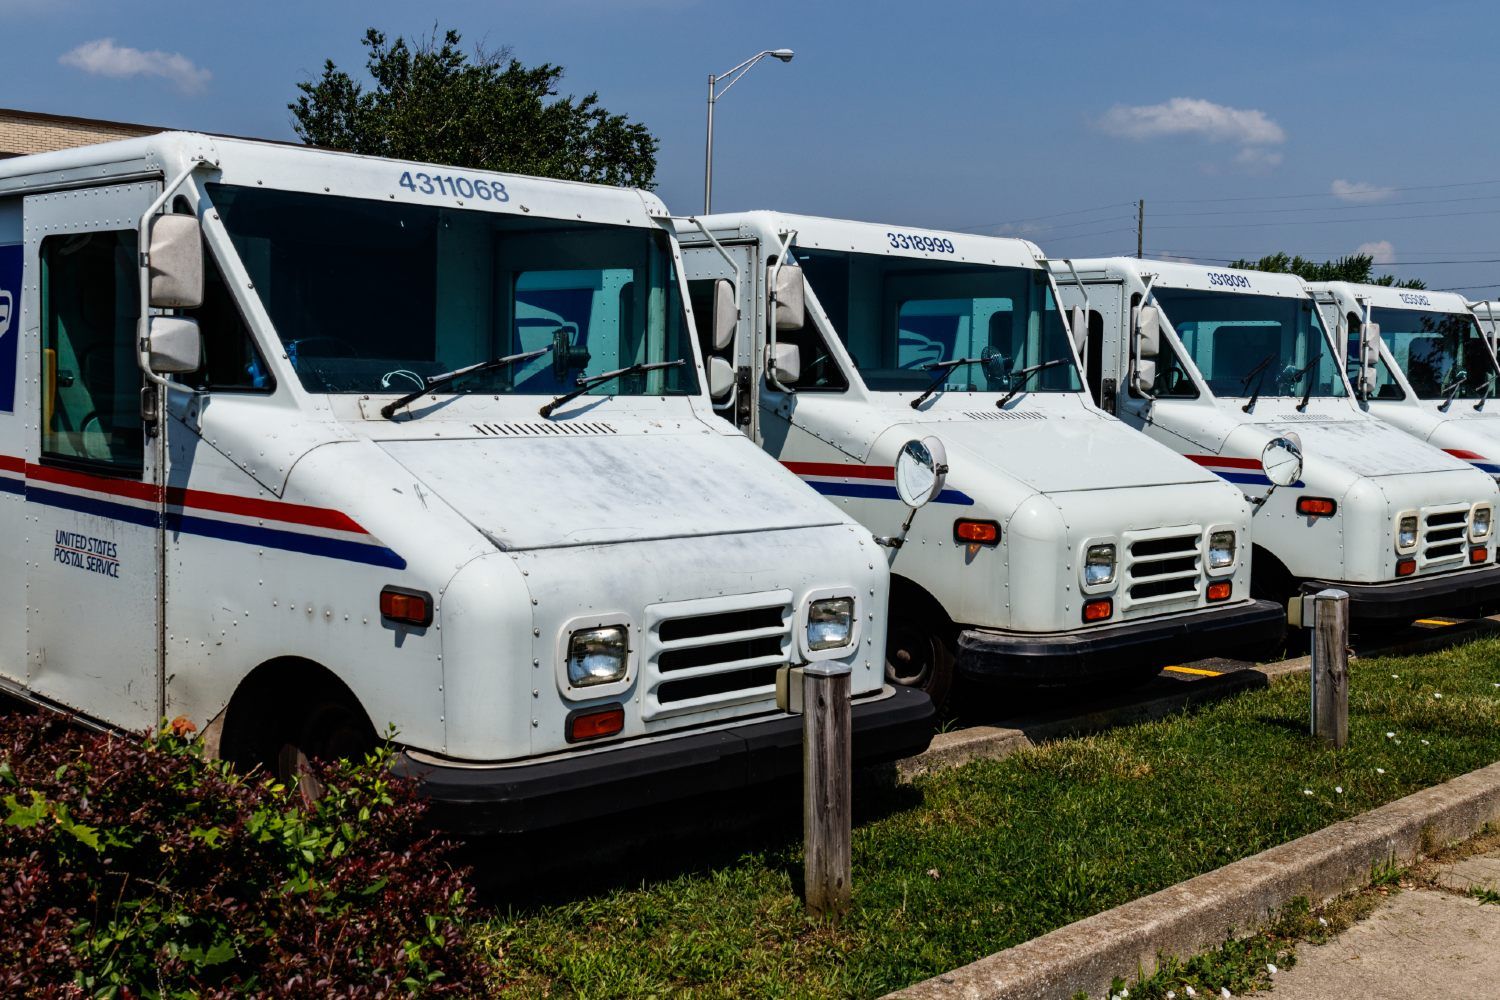 U.S. Postal Service vehicles are parked in a row - ballot delivery